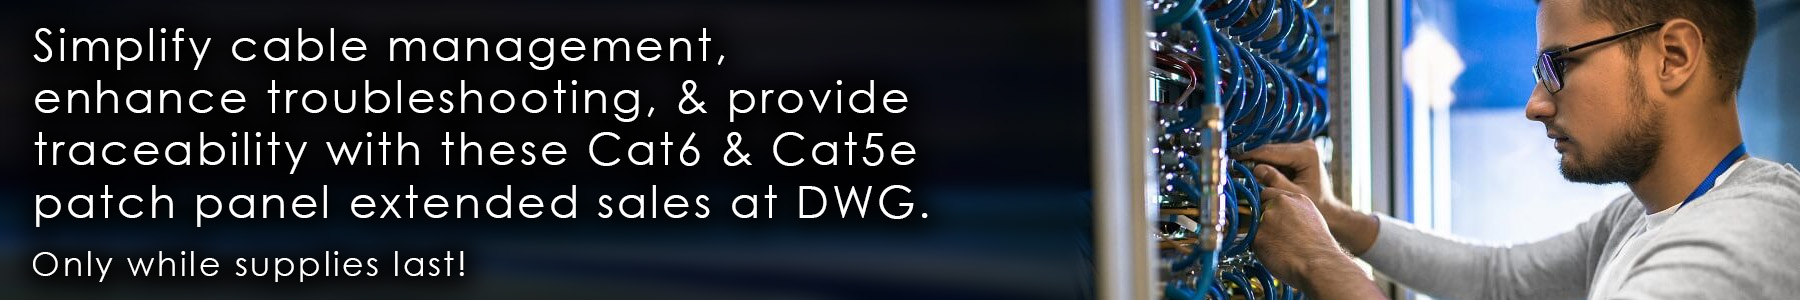 Simplify cable management, enhance troubleshooting, & provide traceability with these Cat6 & Cat5e patch panel extended sales at DWG